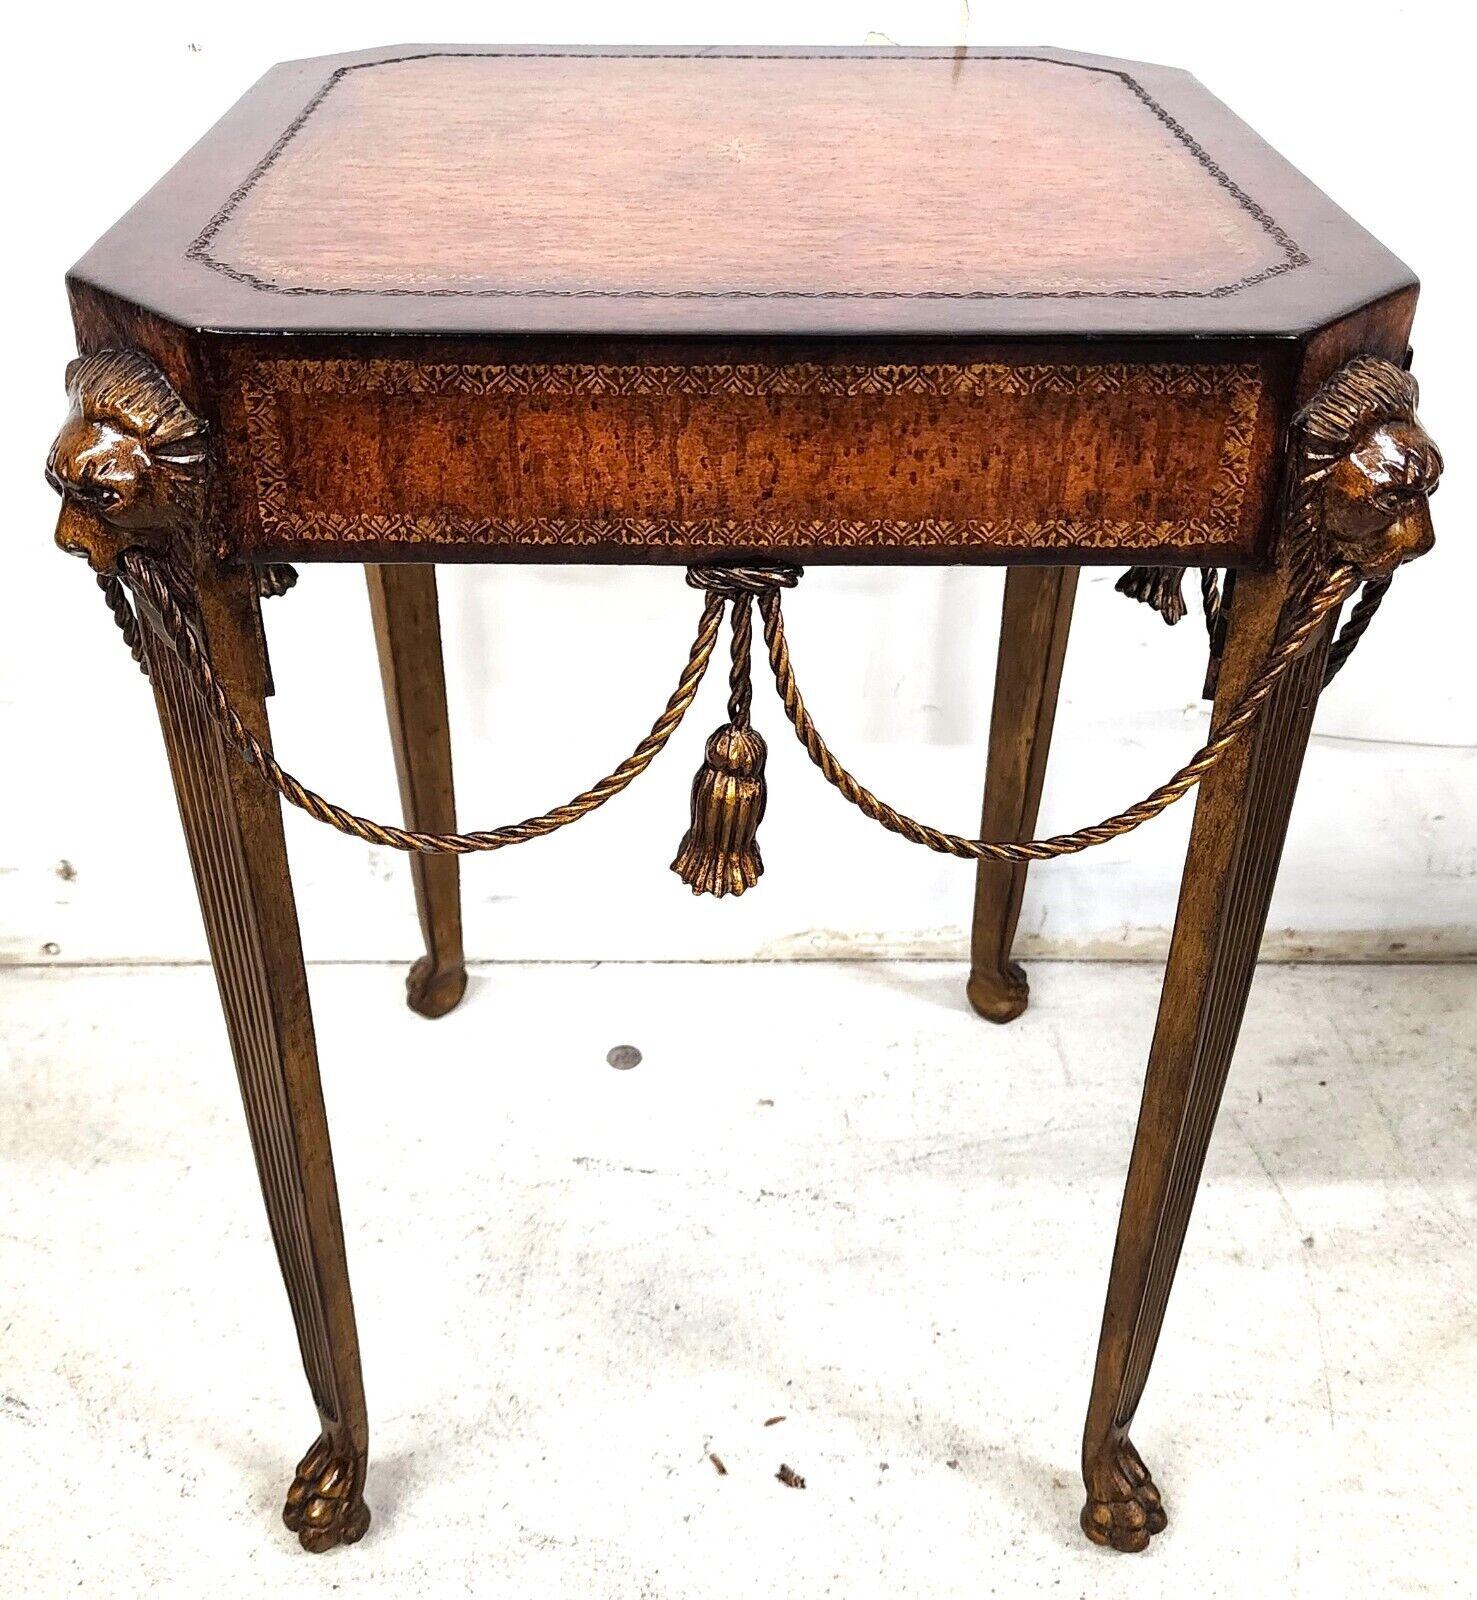 For FULL item description click on CONTINUE READING at the bottom of this page.
Offering One Of Our Recent Palm Beach Estate Fine Furniture Acquisitions Of A Theodore Alexander Style Bronze Legs, Lion Heads and Rope & Tassel Side Drink Table
With